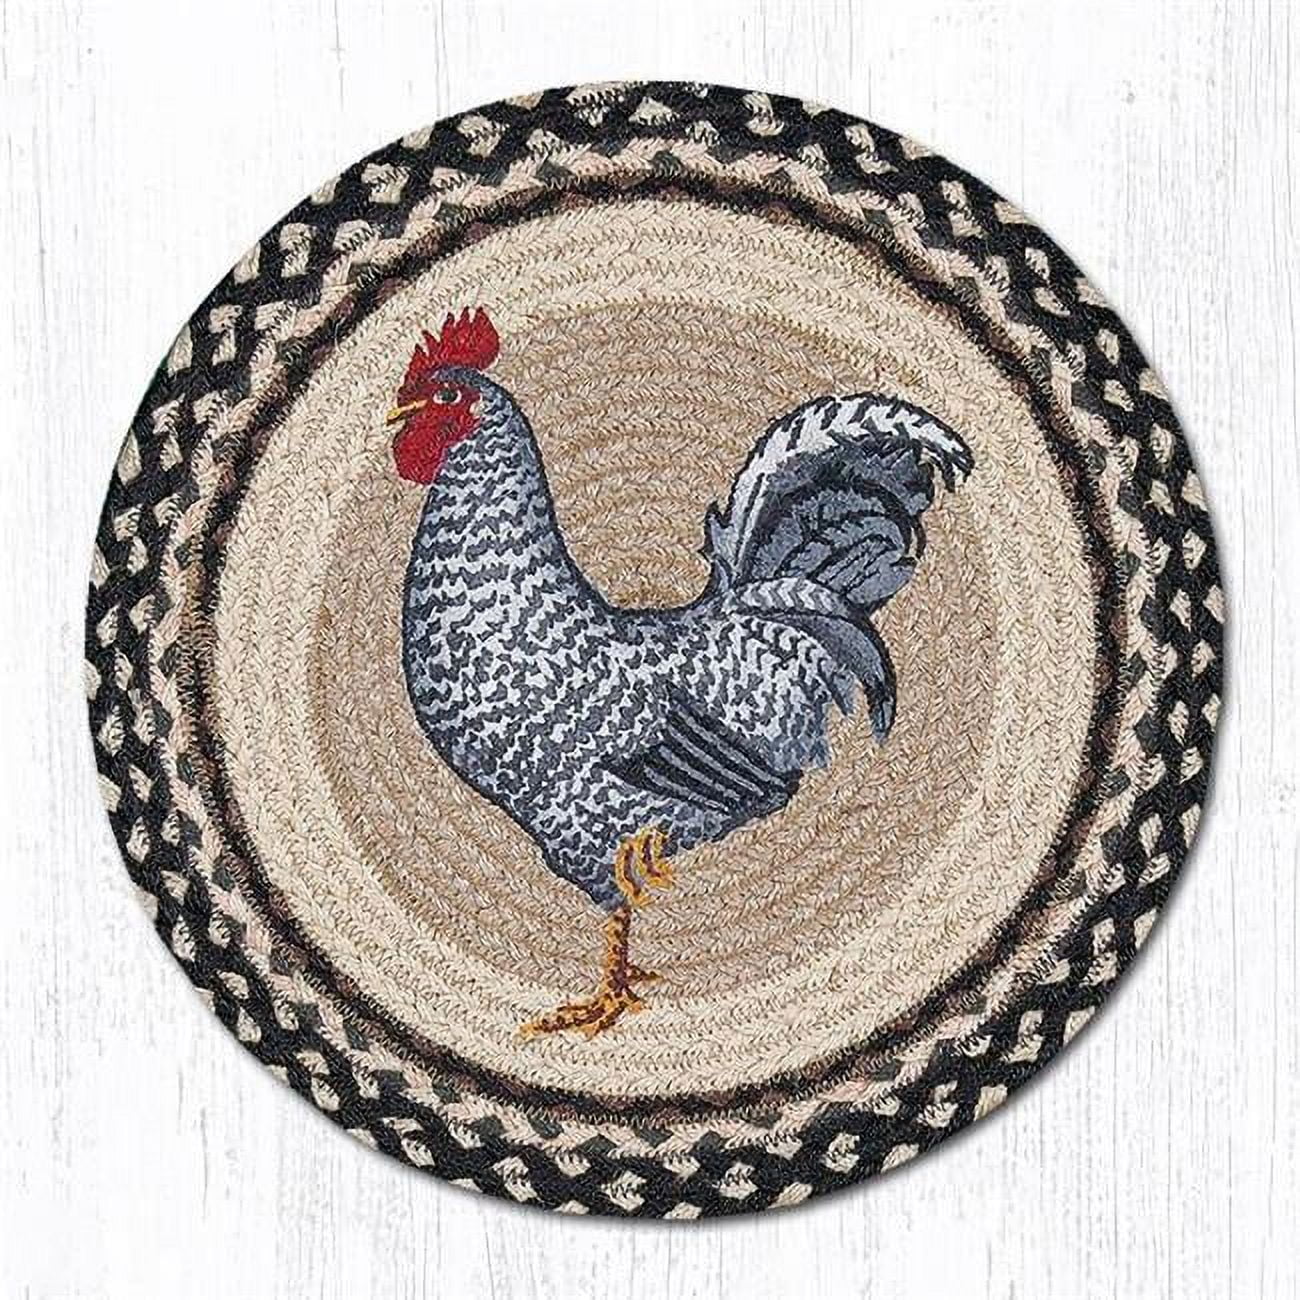 15 In. Rooster Round Printed Placemat Rug